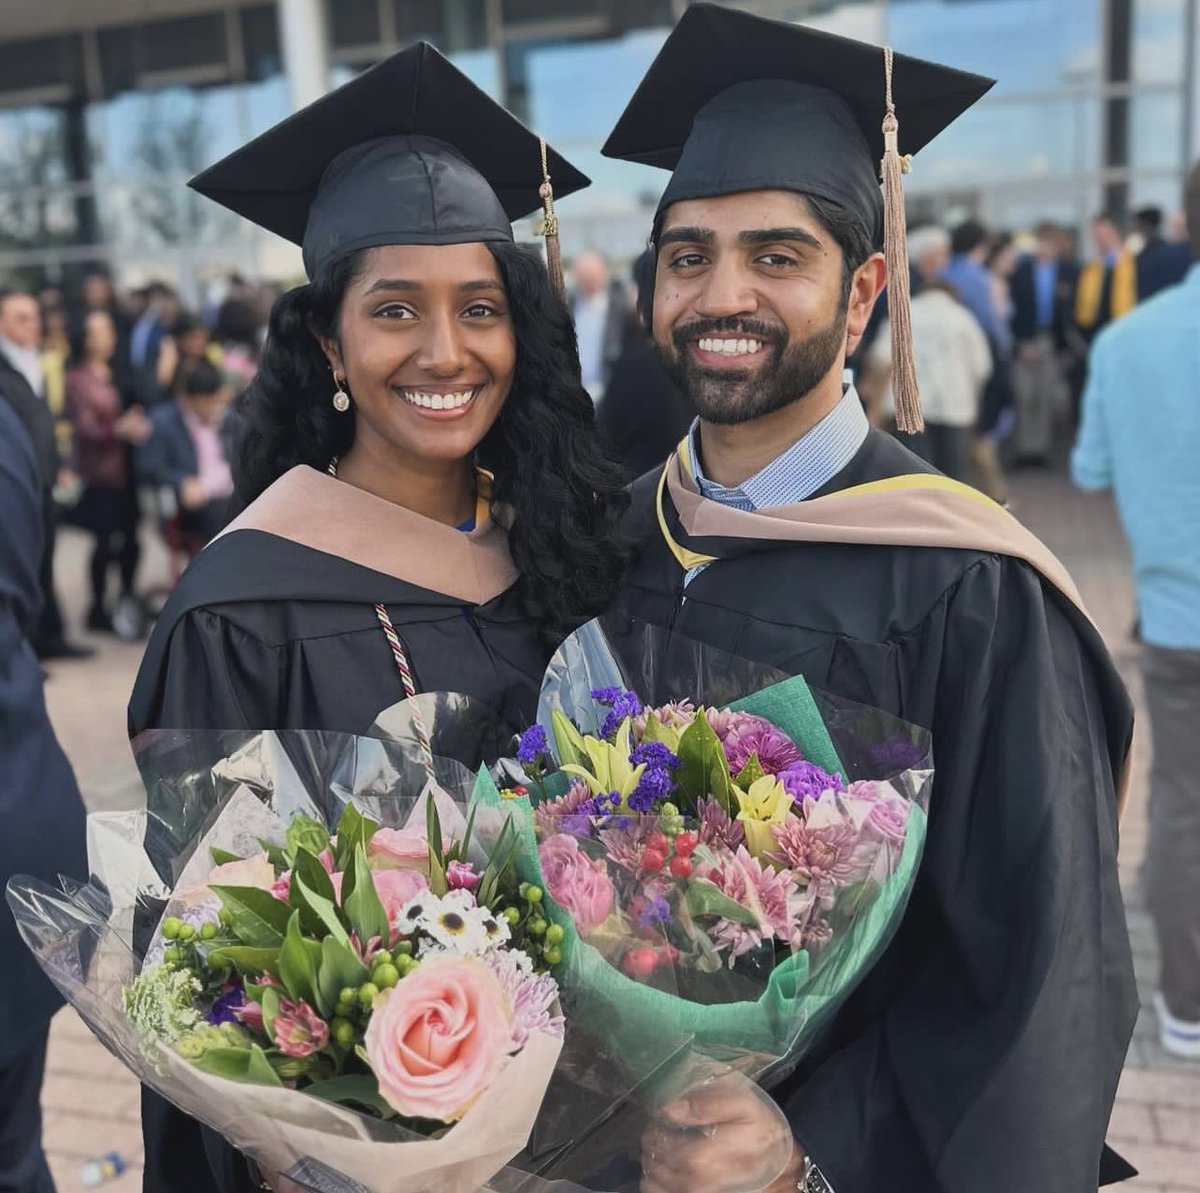 Peep the name change—I graduated with my MBA from the @MichiganRoss School of Business last Friday. Can’t wait to add on my MD this Friday! So grateful for the opportunity to fulfill all my career interests at @UMichMedSchool.